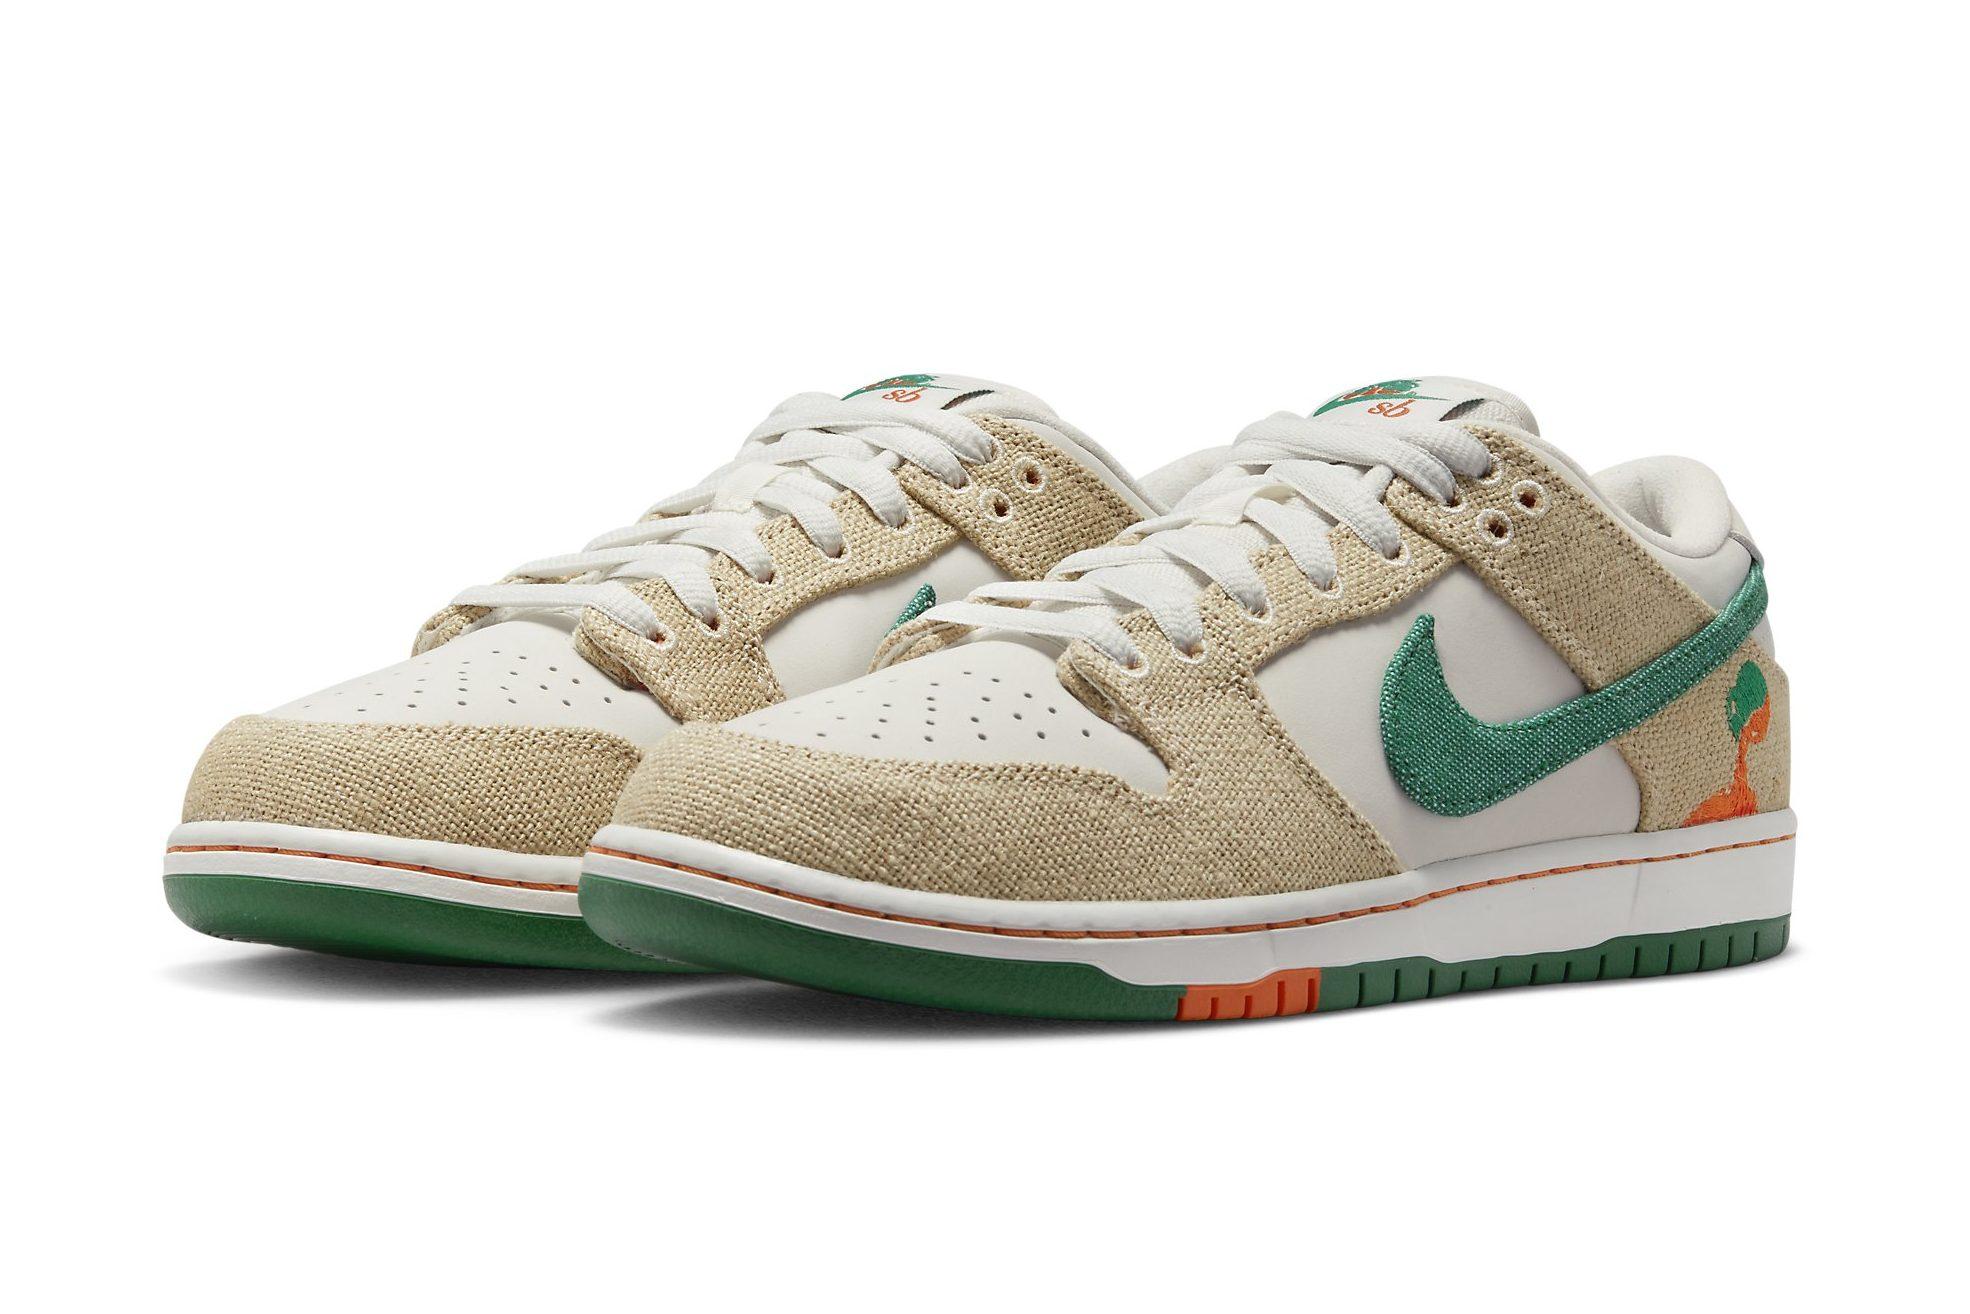 Shares Image Of The Uping Nike Air Ship White Green